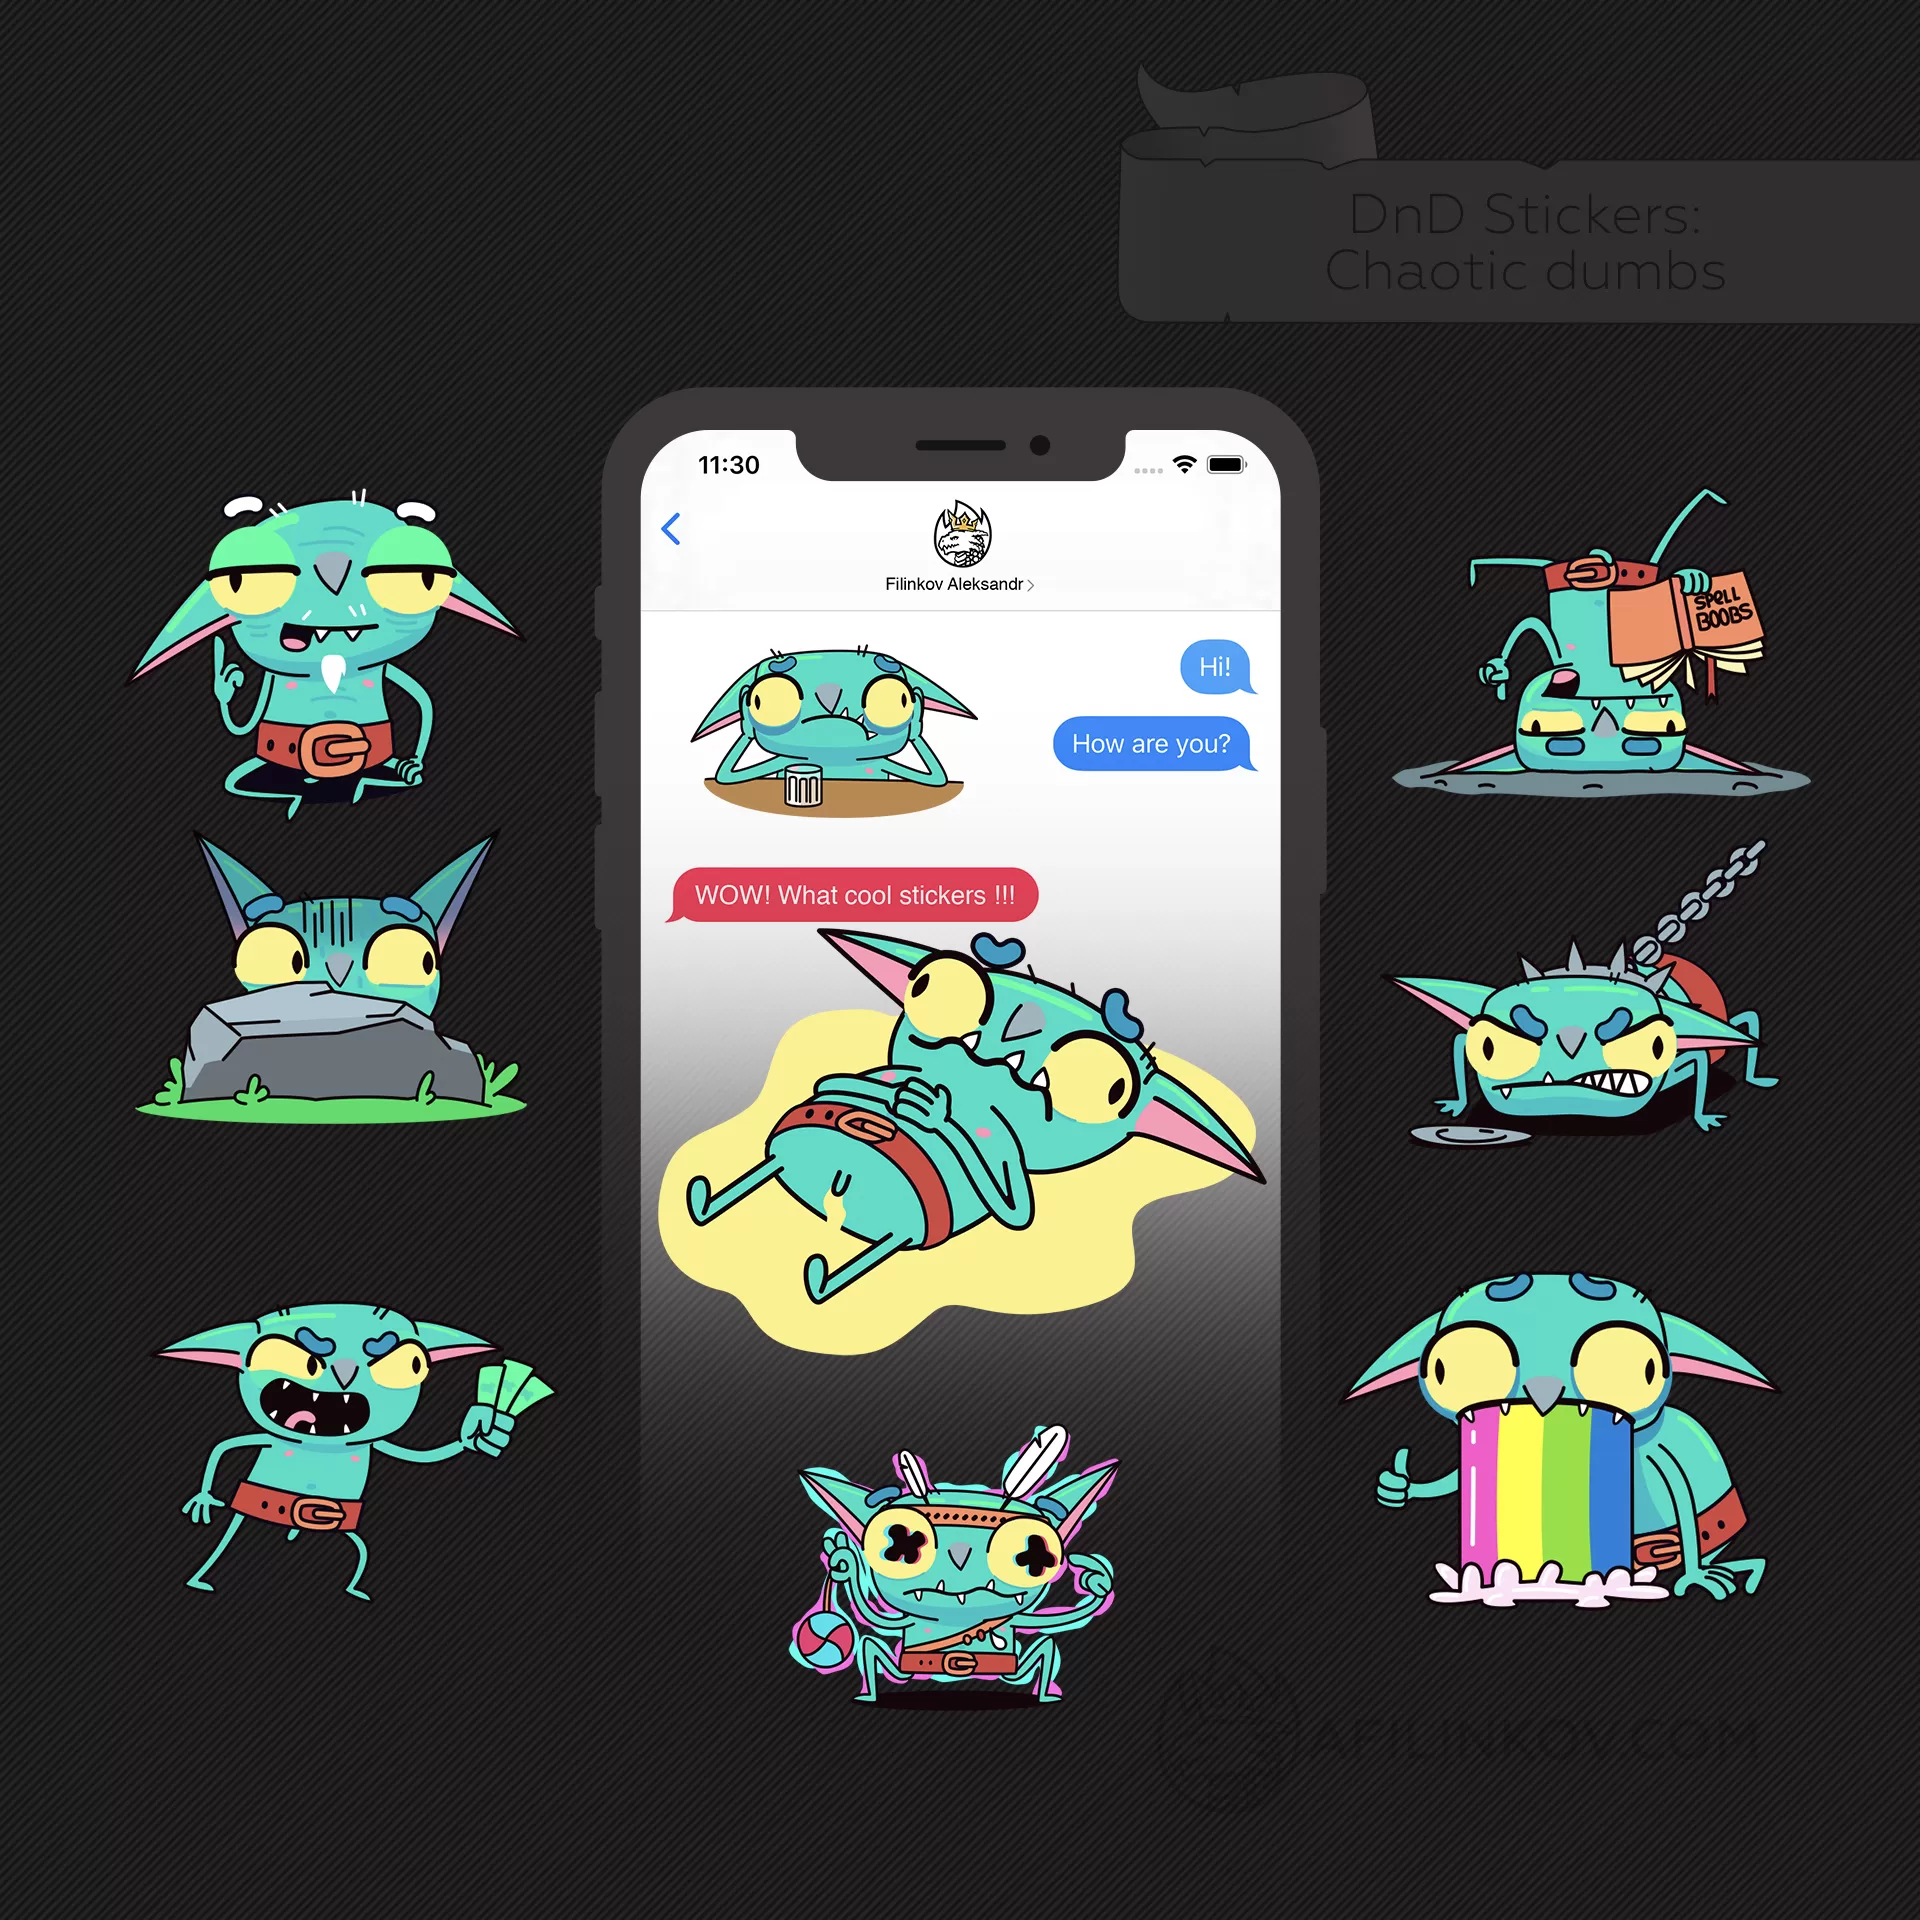 Chaotic Dumbs - DnD Stickers for Telegram